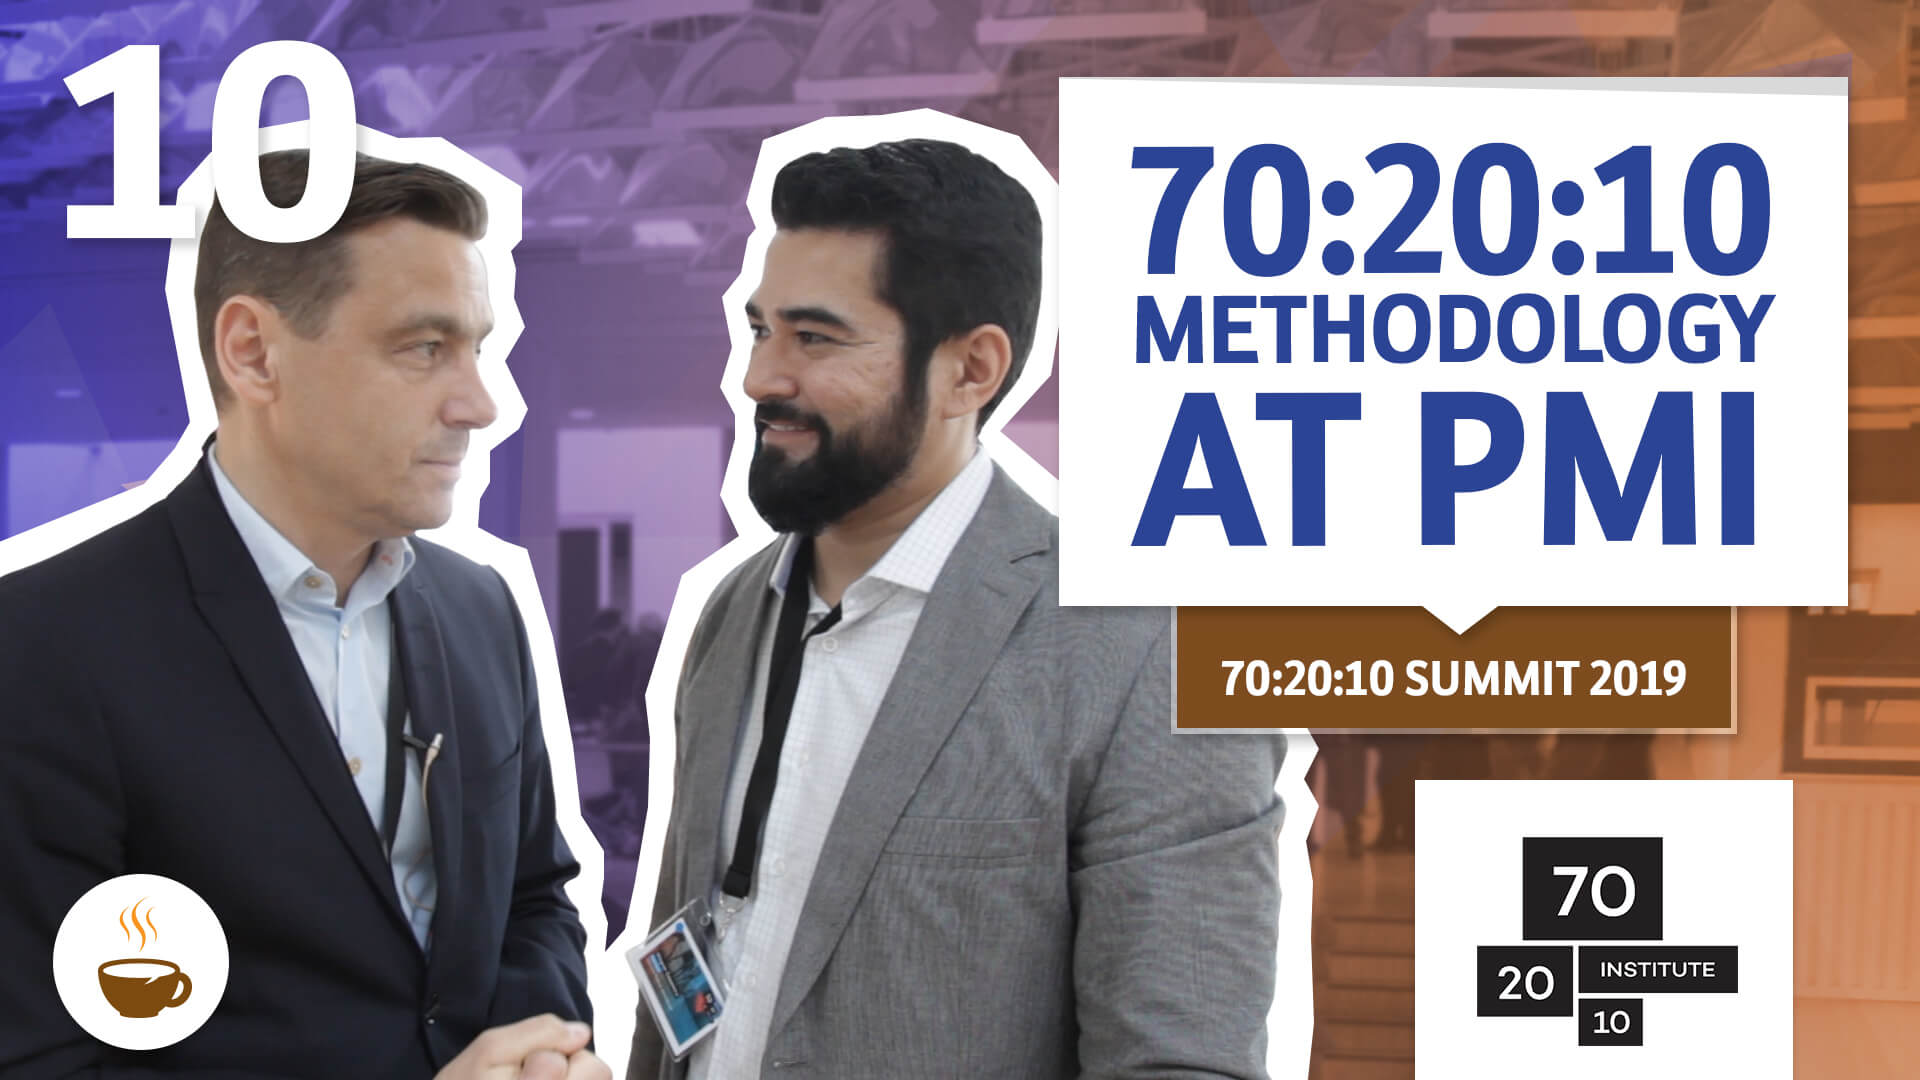 Wagner Cassimiro interview Vitaly about 70:20:10 methodology at PMI in the 70:20:10 Summit, 2019